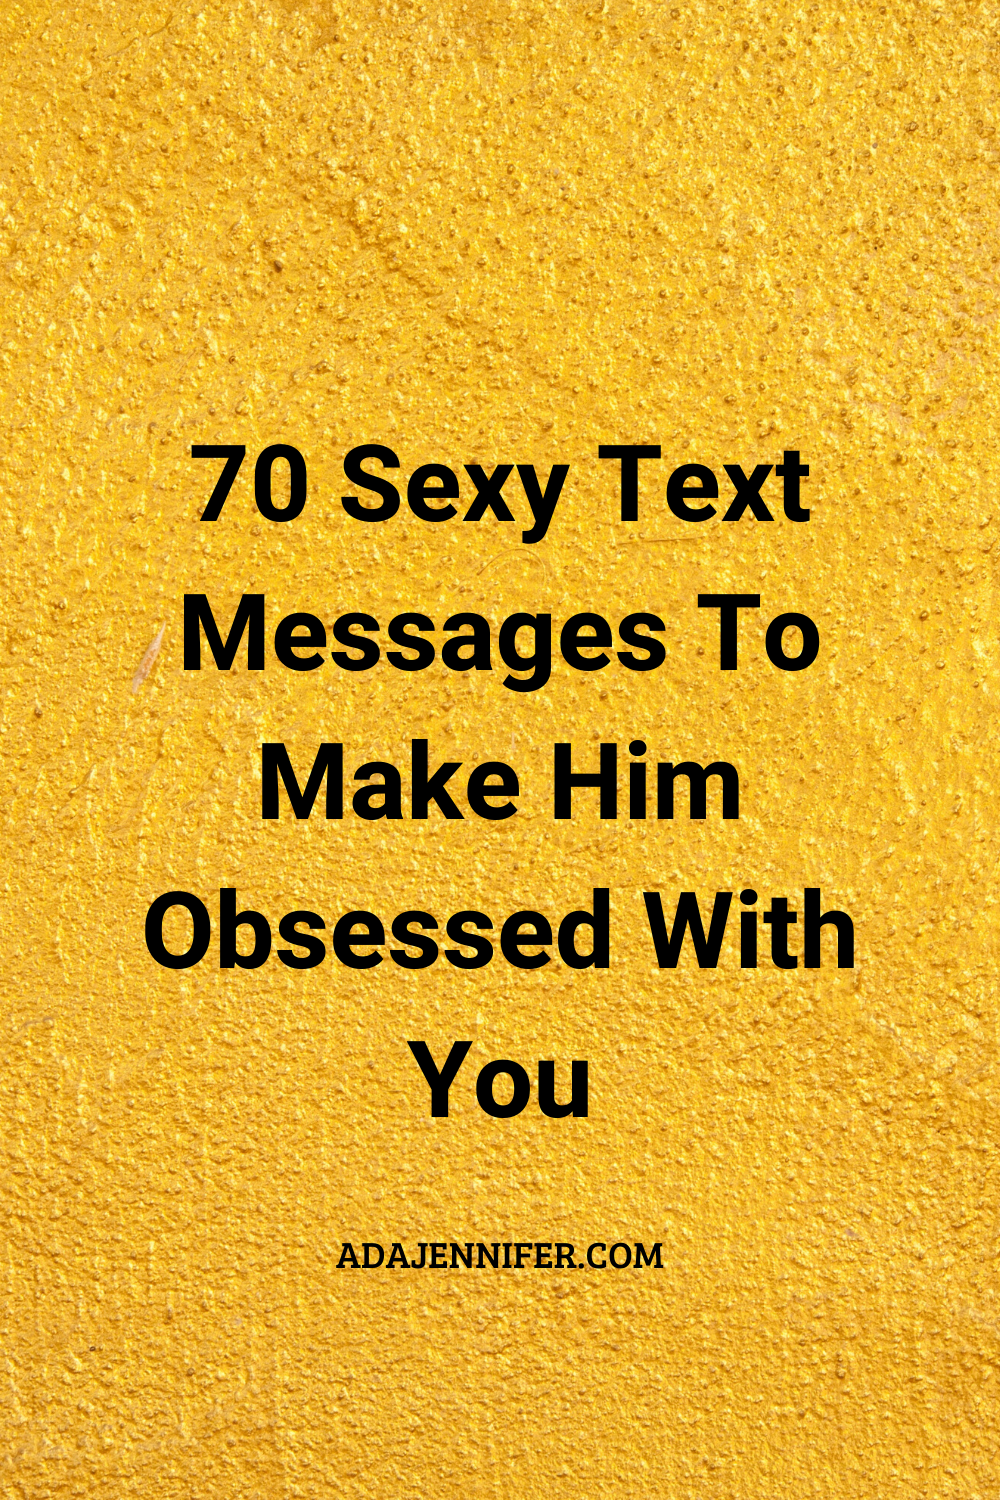 70 Sexy Messages To Make Him Obsessed With You 2021